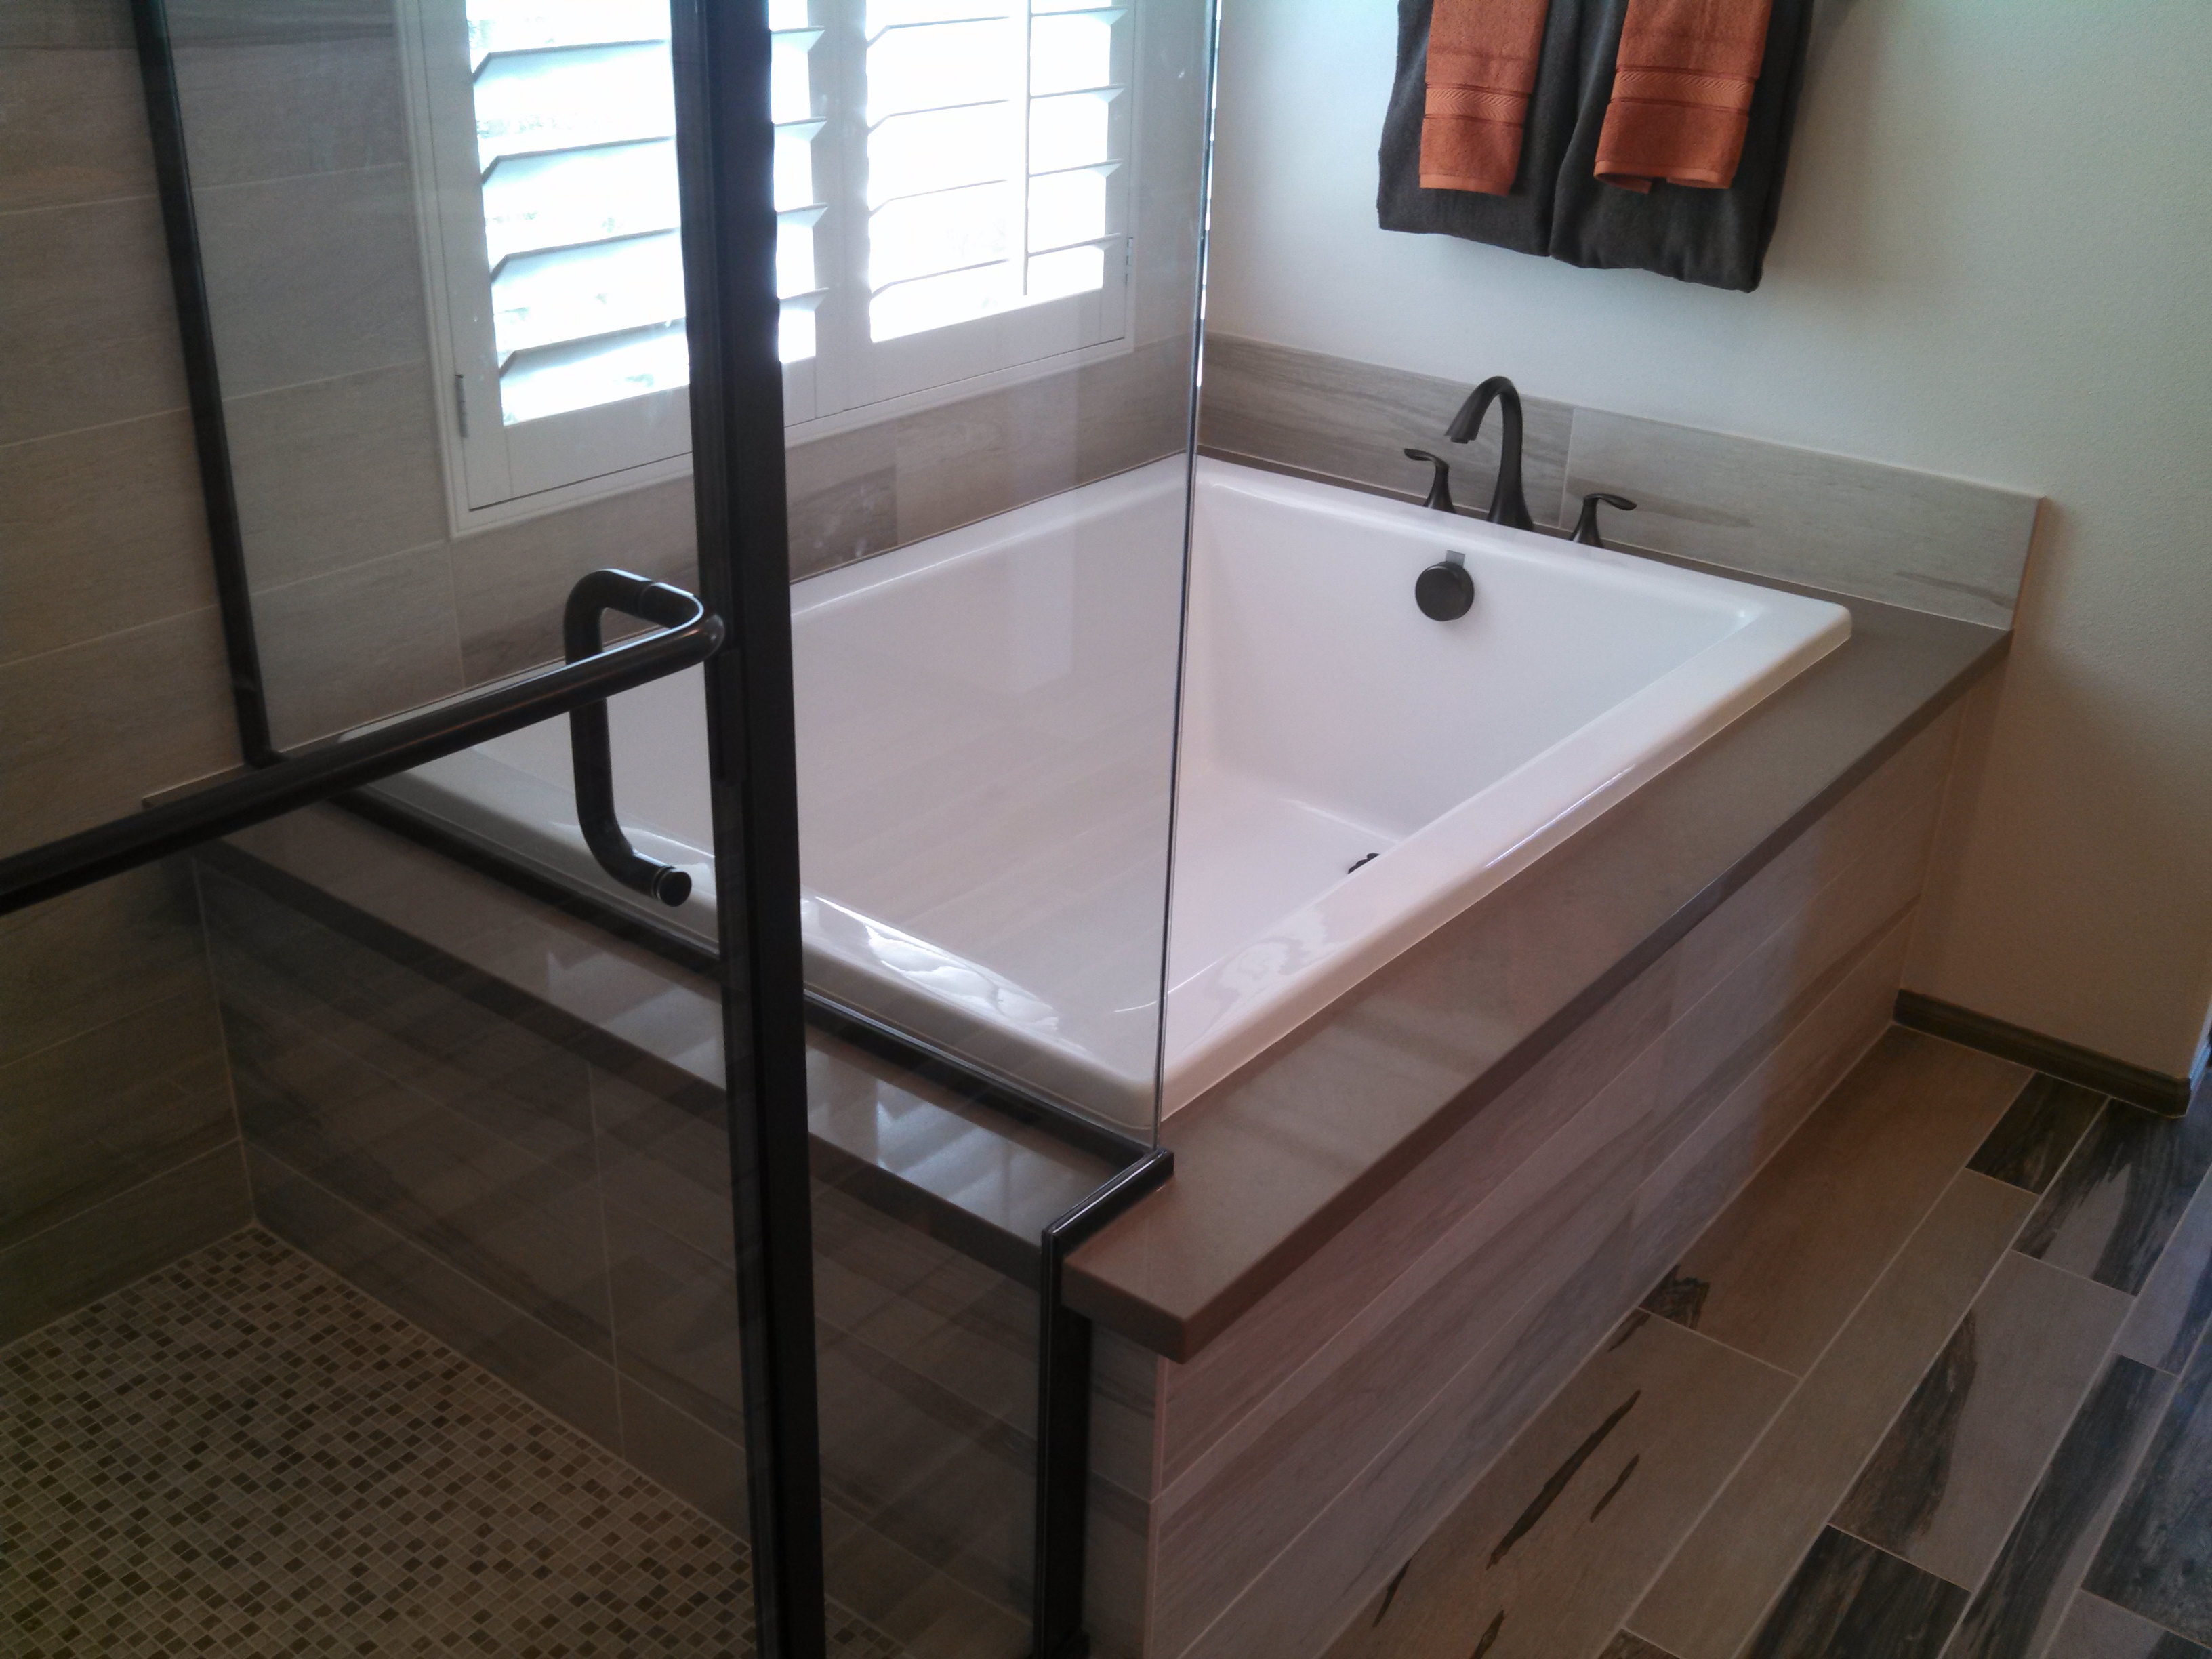 This is an example of how one leading national builder has incorporated Aquatic's new, contemporary tub into a striking bathroom design.